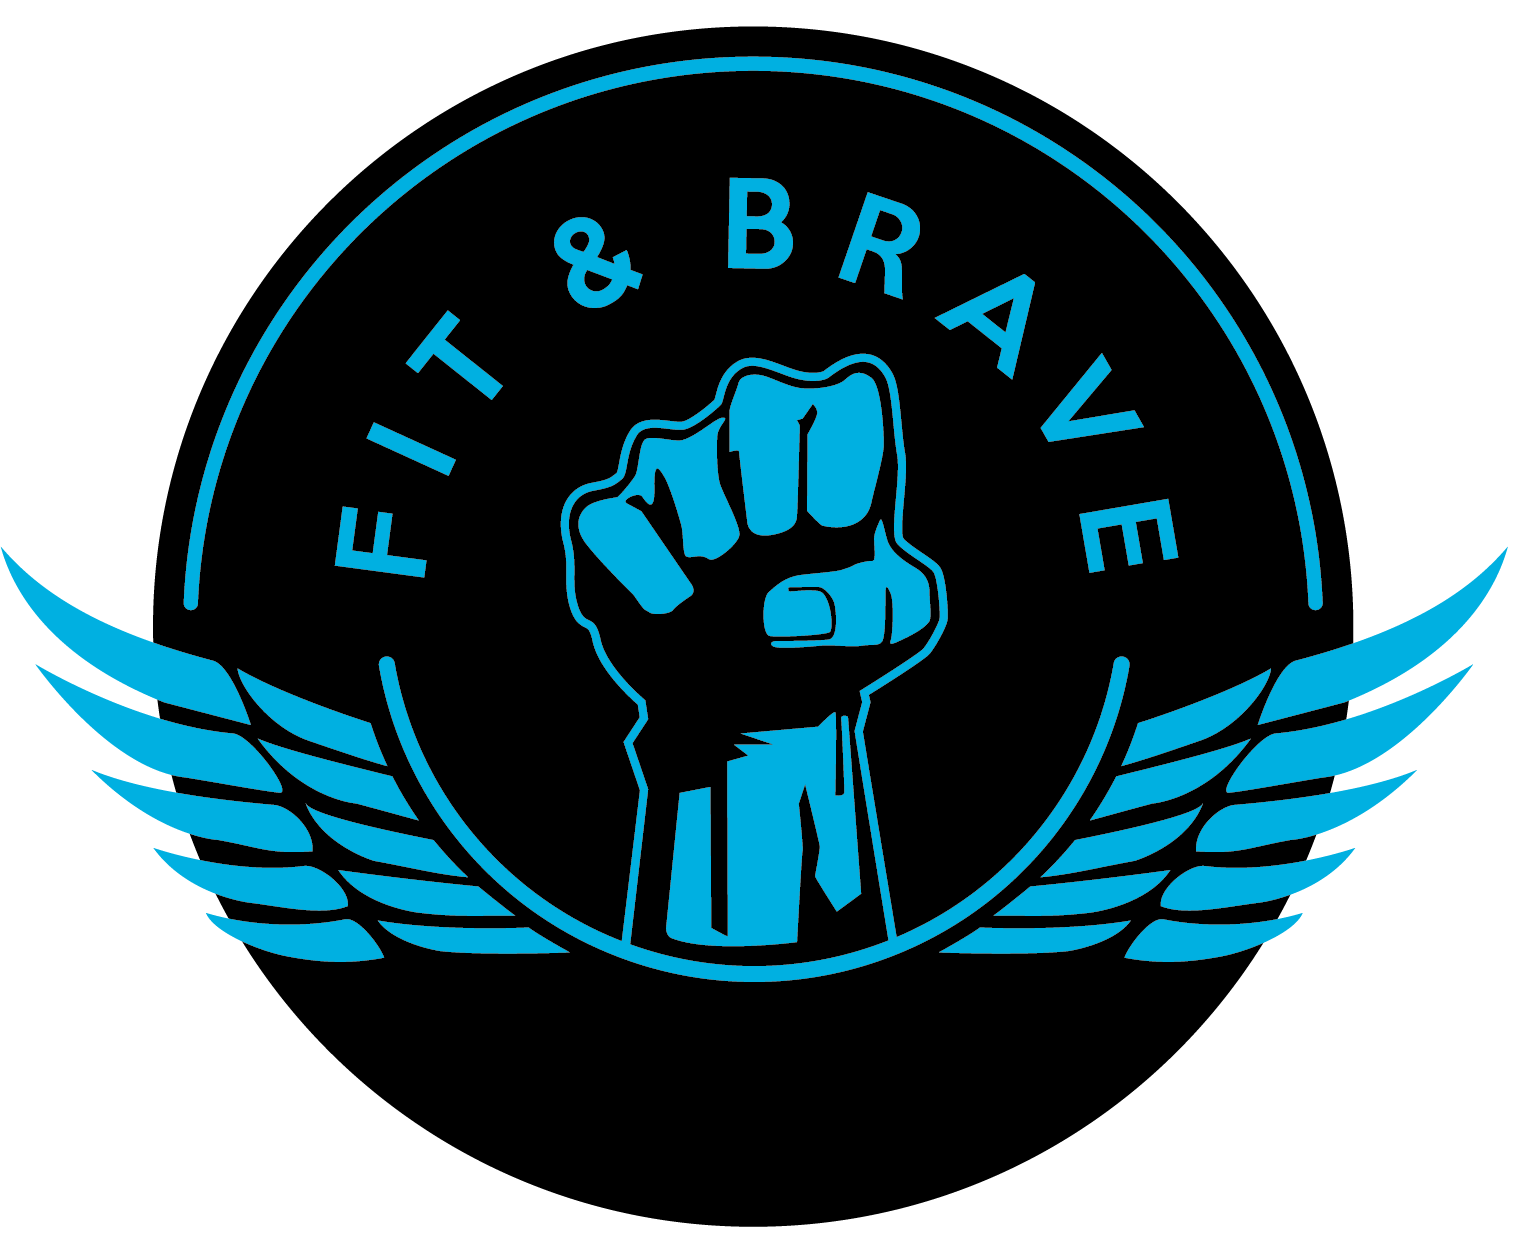 FIT AND BRAVE